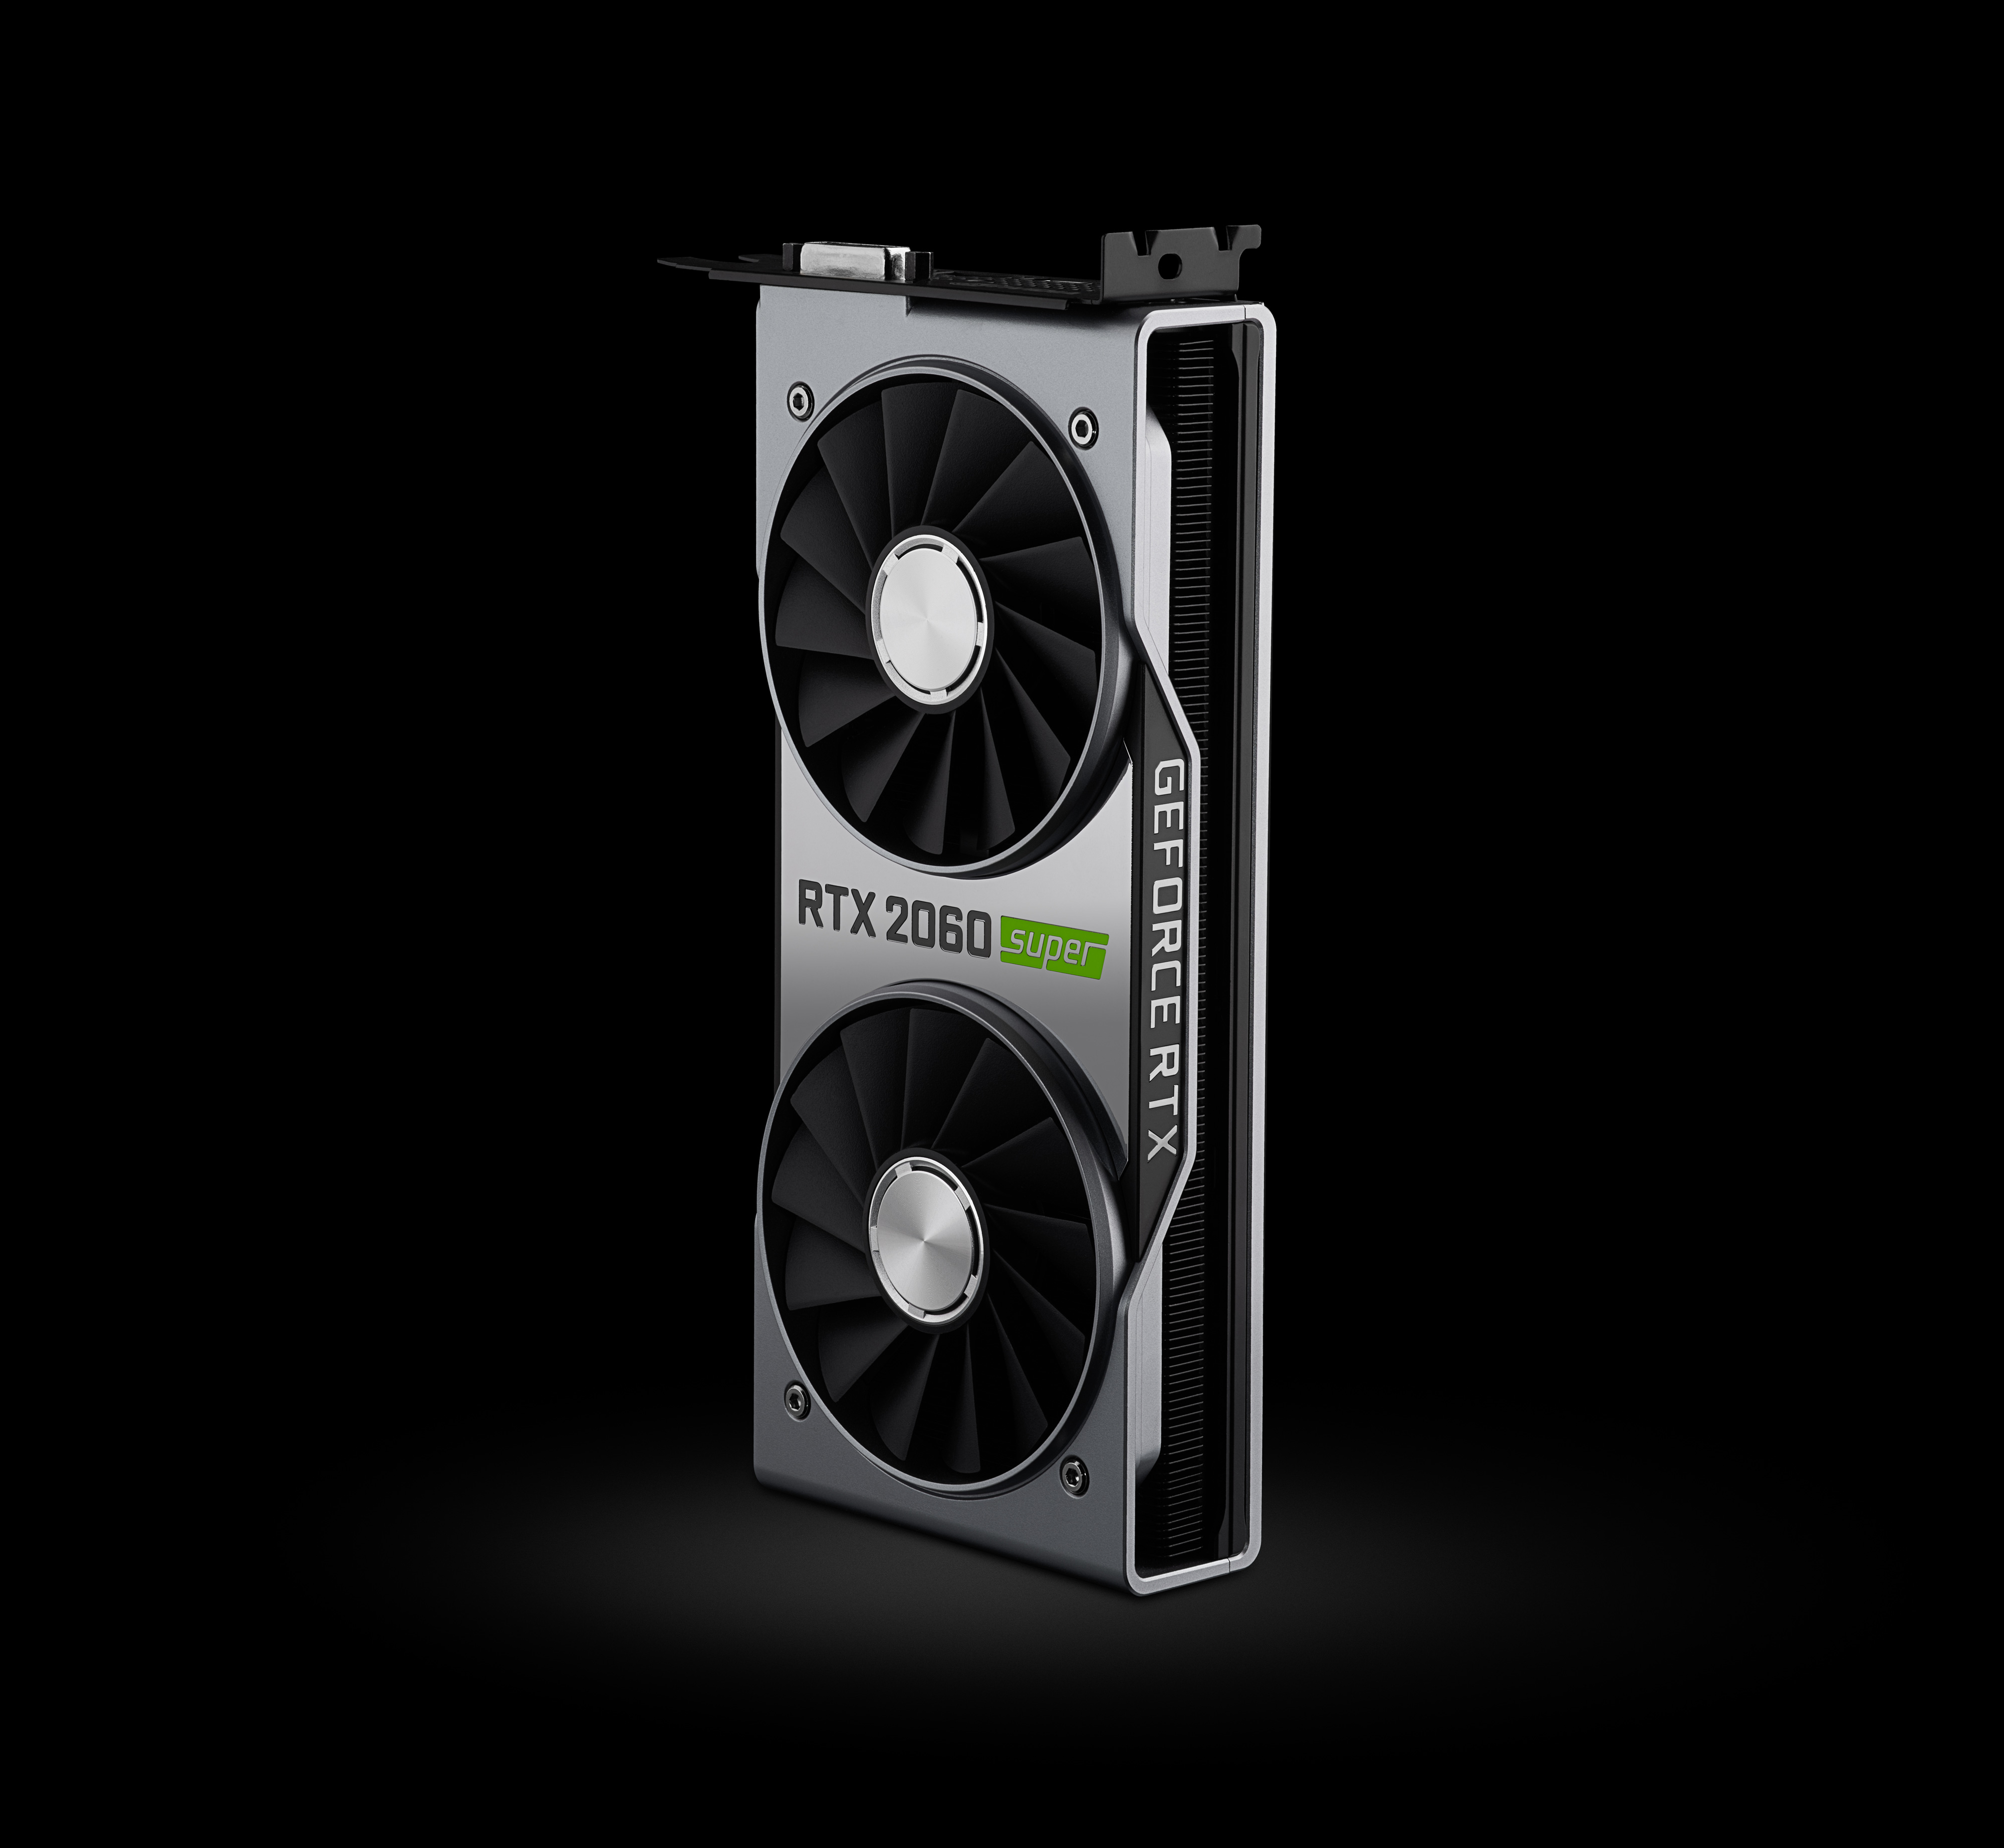 Meet the GeForce RTX 2070 Super & RTX 2060 Super - NVIDIA GeForce RTX 2070 Super & RTX 2060 Review: Smaller Numbers, Bigger Performance